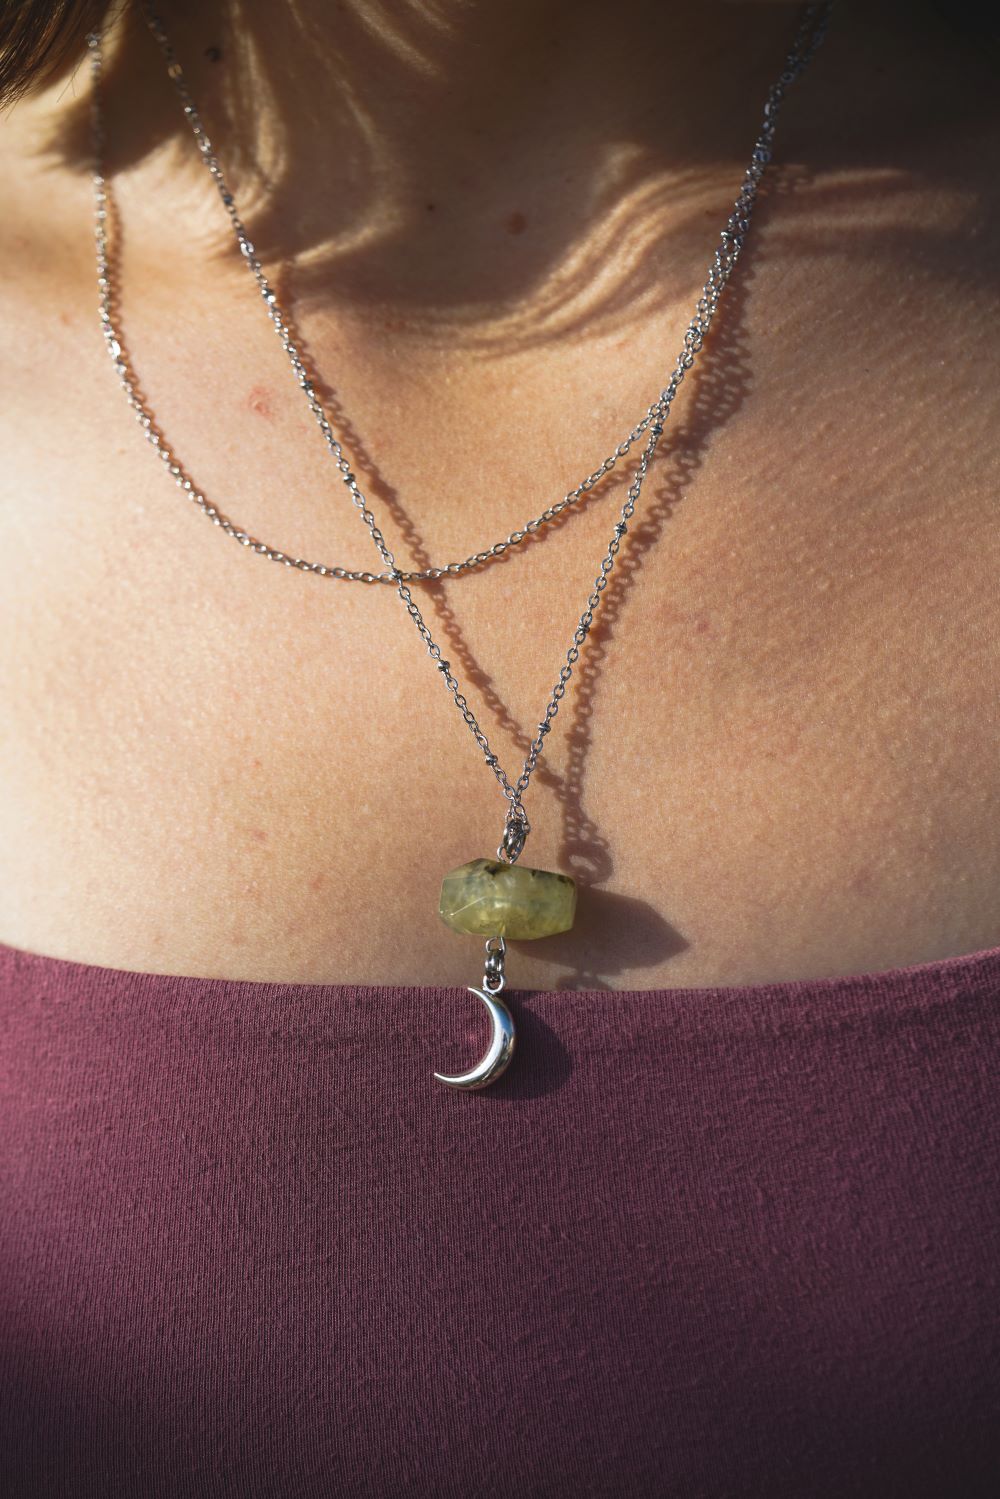 This gorgeous Prehnite stone is about .45" long, suspended from 18" and 20" long stainless steel chains with a 2" extension. In addition, I infuse each of my handcrafted crystal designs with Reiki energy and charge and clear them with sunlight, moonlight, and sage, which amplifies not only the stones but your intentions as well. This necklace came to be for a specific person and situation, there are no coincidences, so if you stumbled across this page, maybe it was meant for you:)